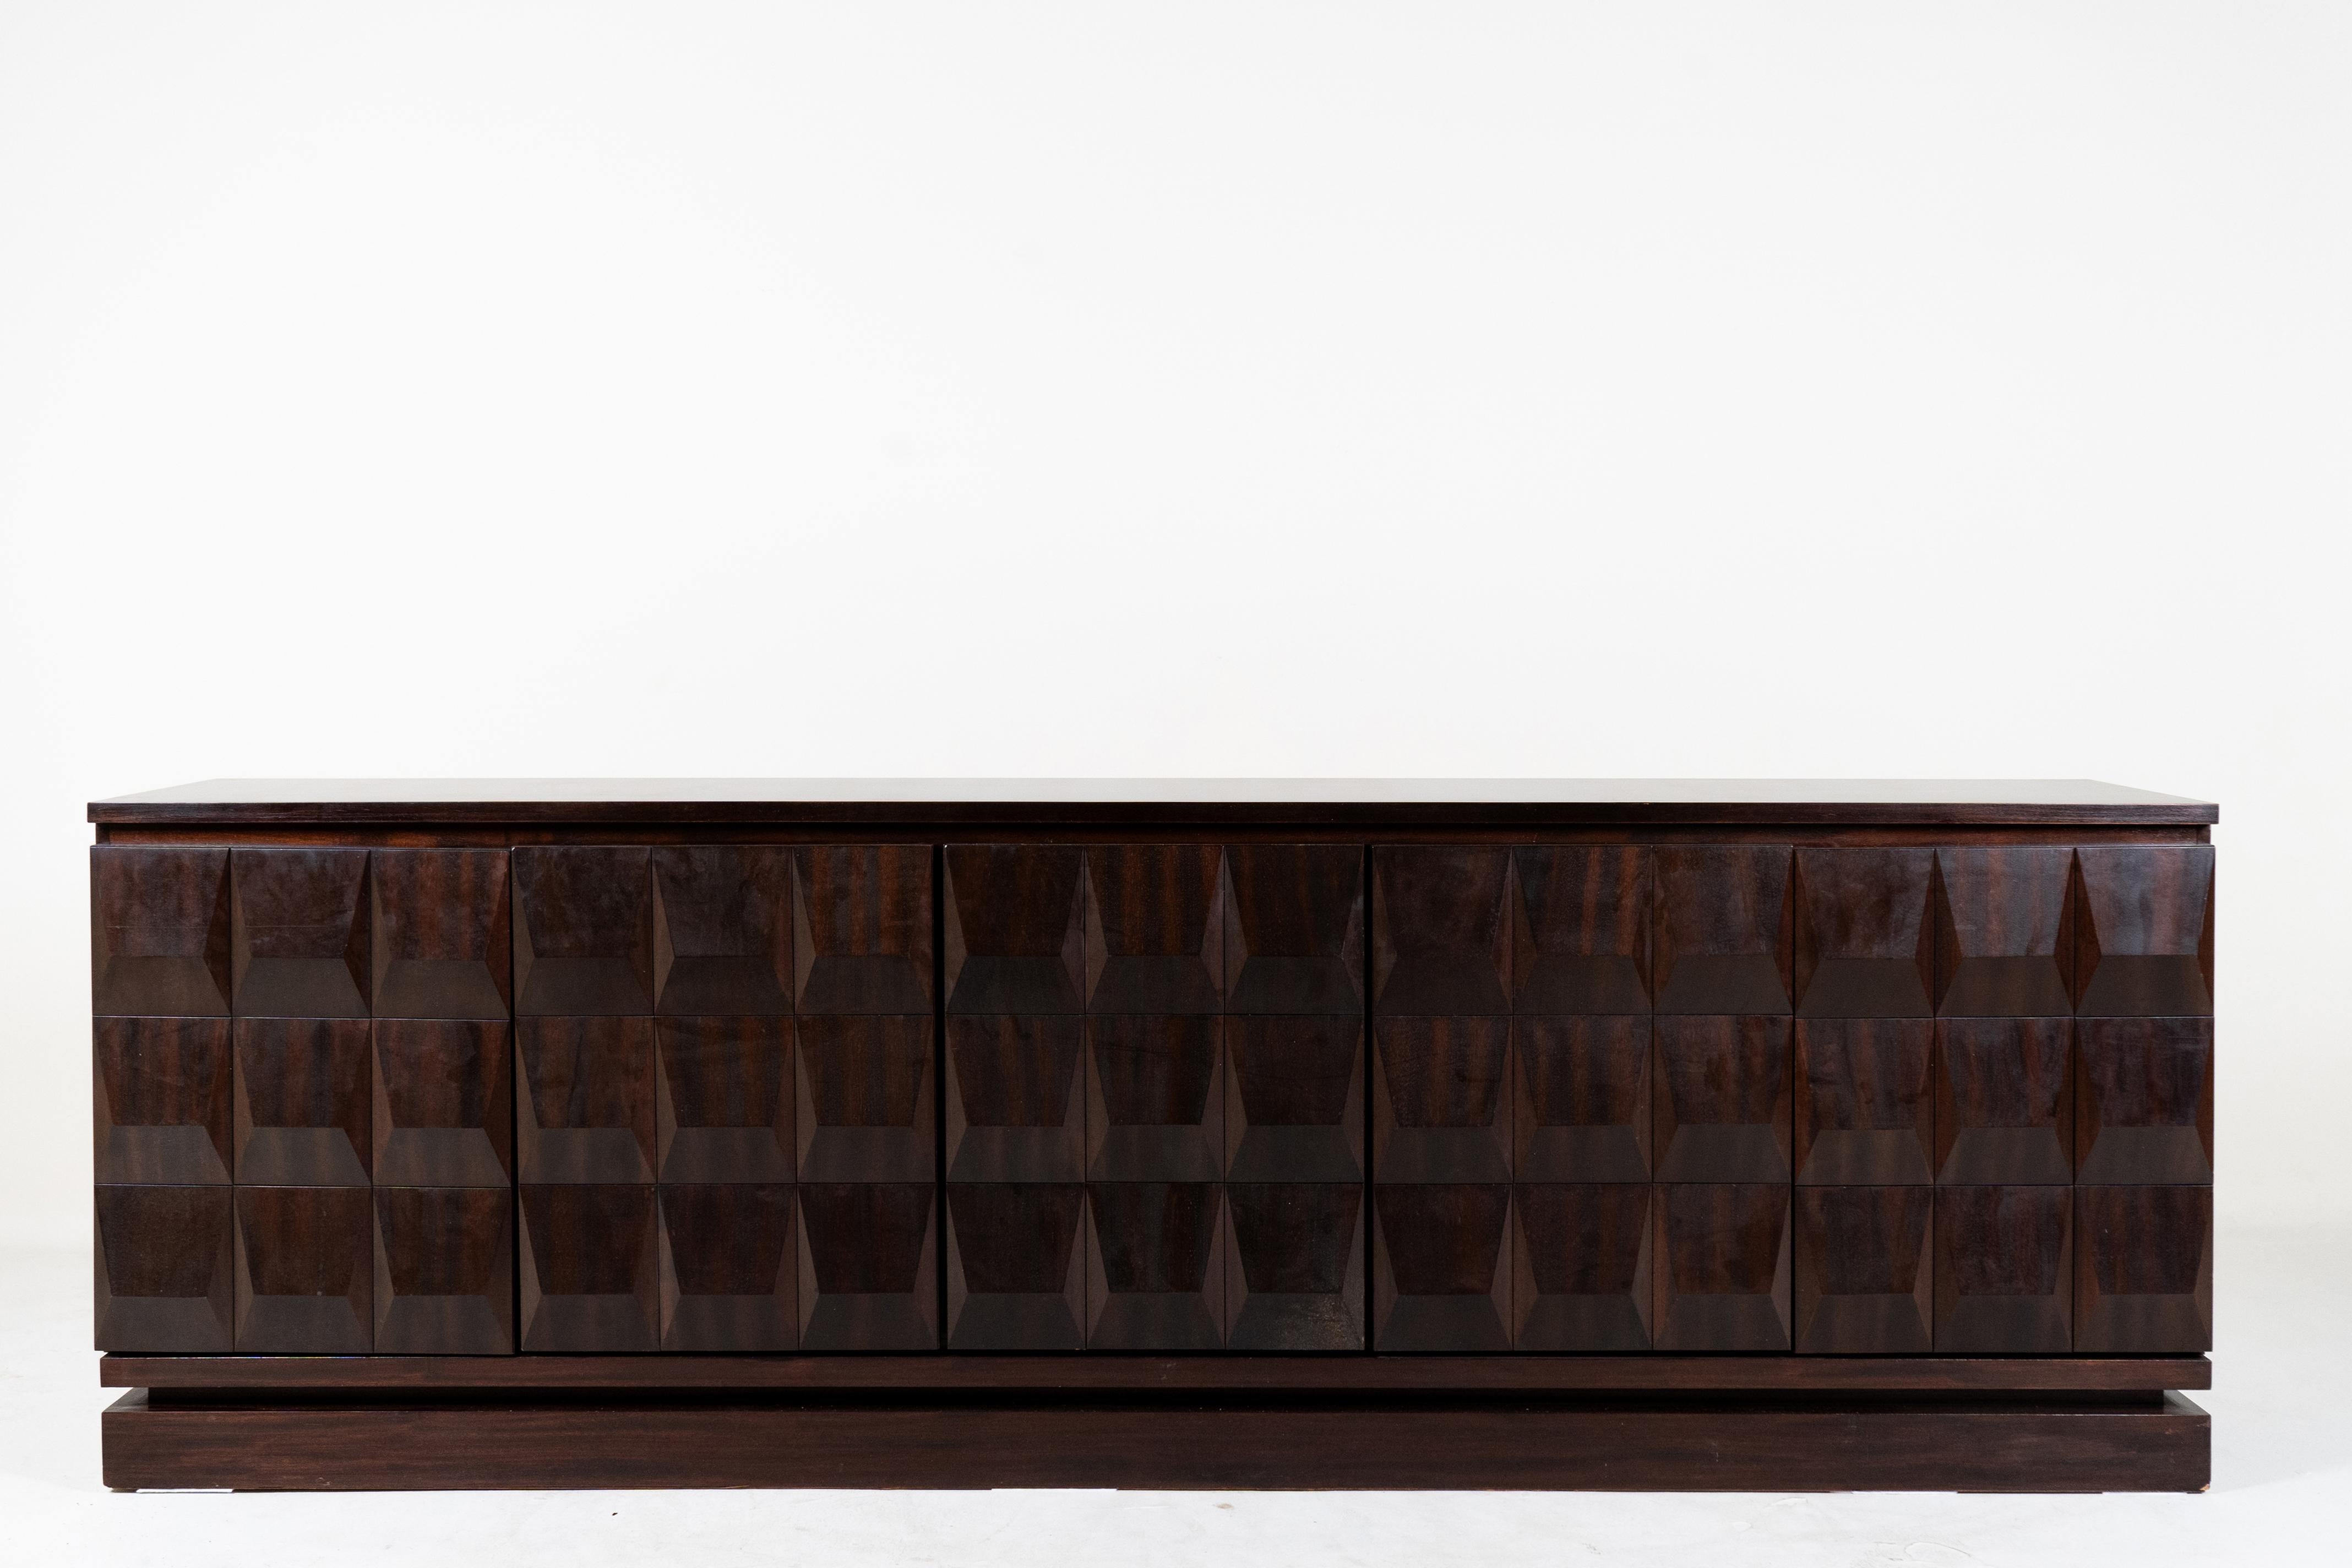 This monumental sideboard was made by  De Coene Frères, an elite Belgian furniture manufacturing company that operated from 1889 until the early 1970s. Over the years, De Coene Freres Produced a wide range of furniture from high quality materials